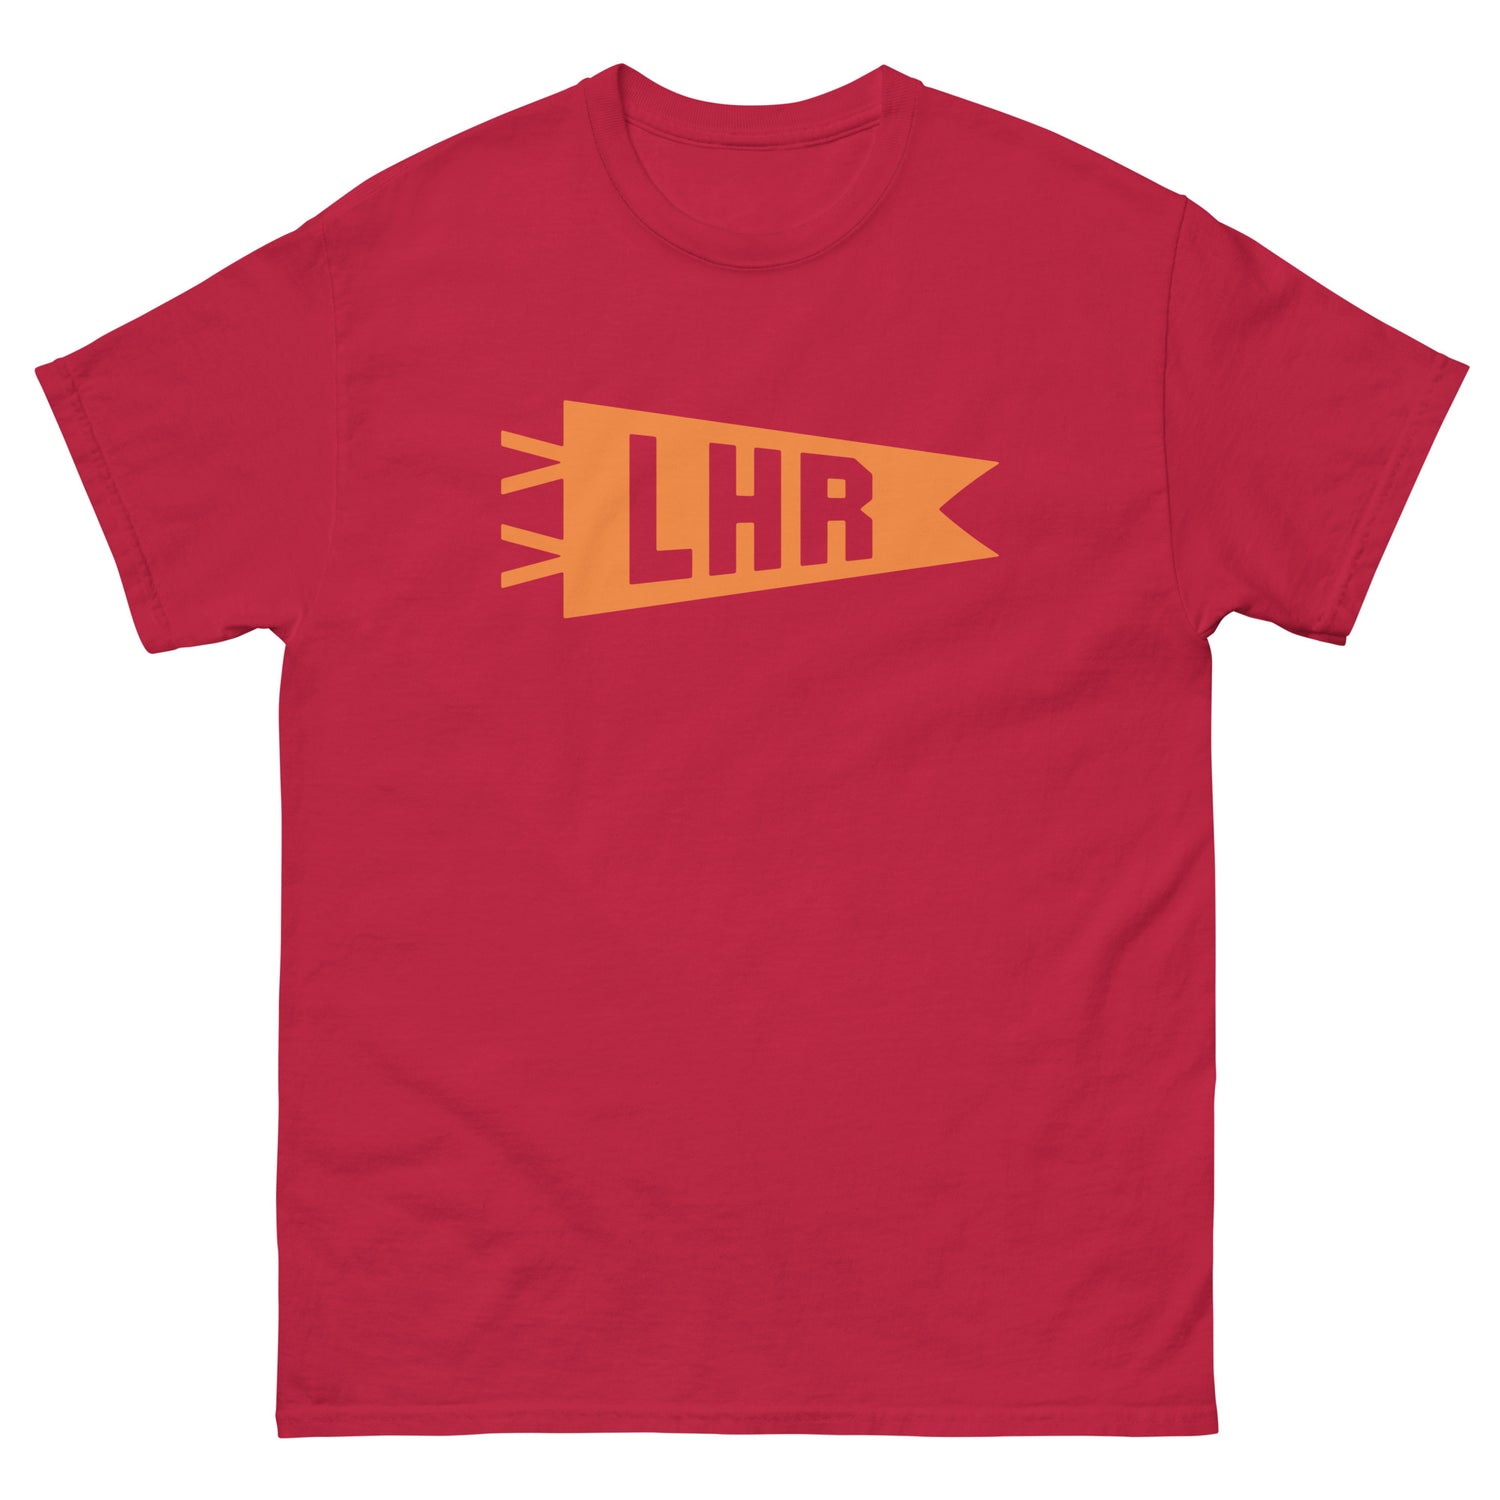 London England Adult T-Shirts • LHR Airport Code